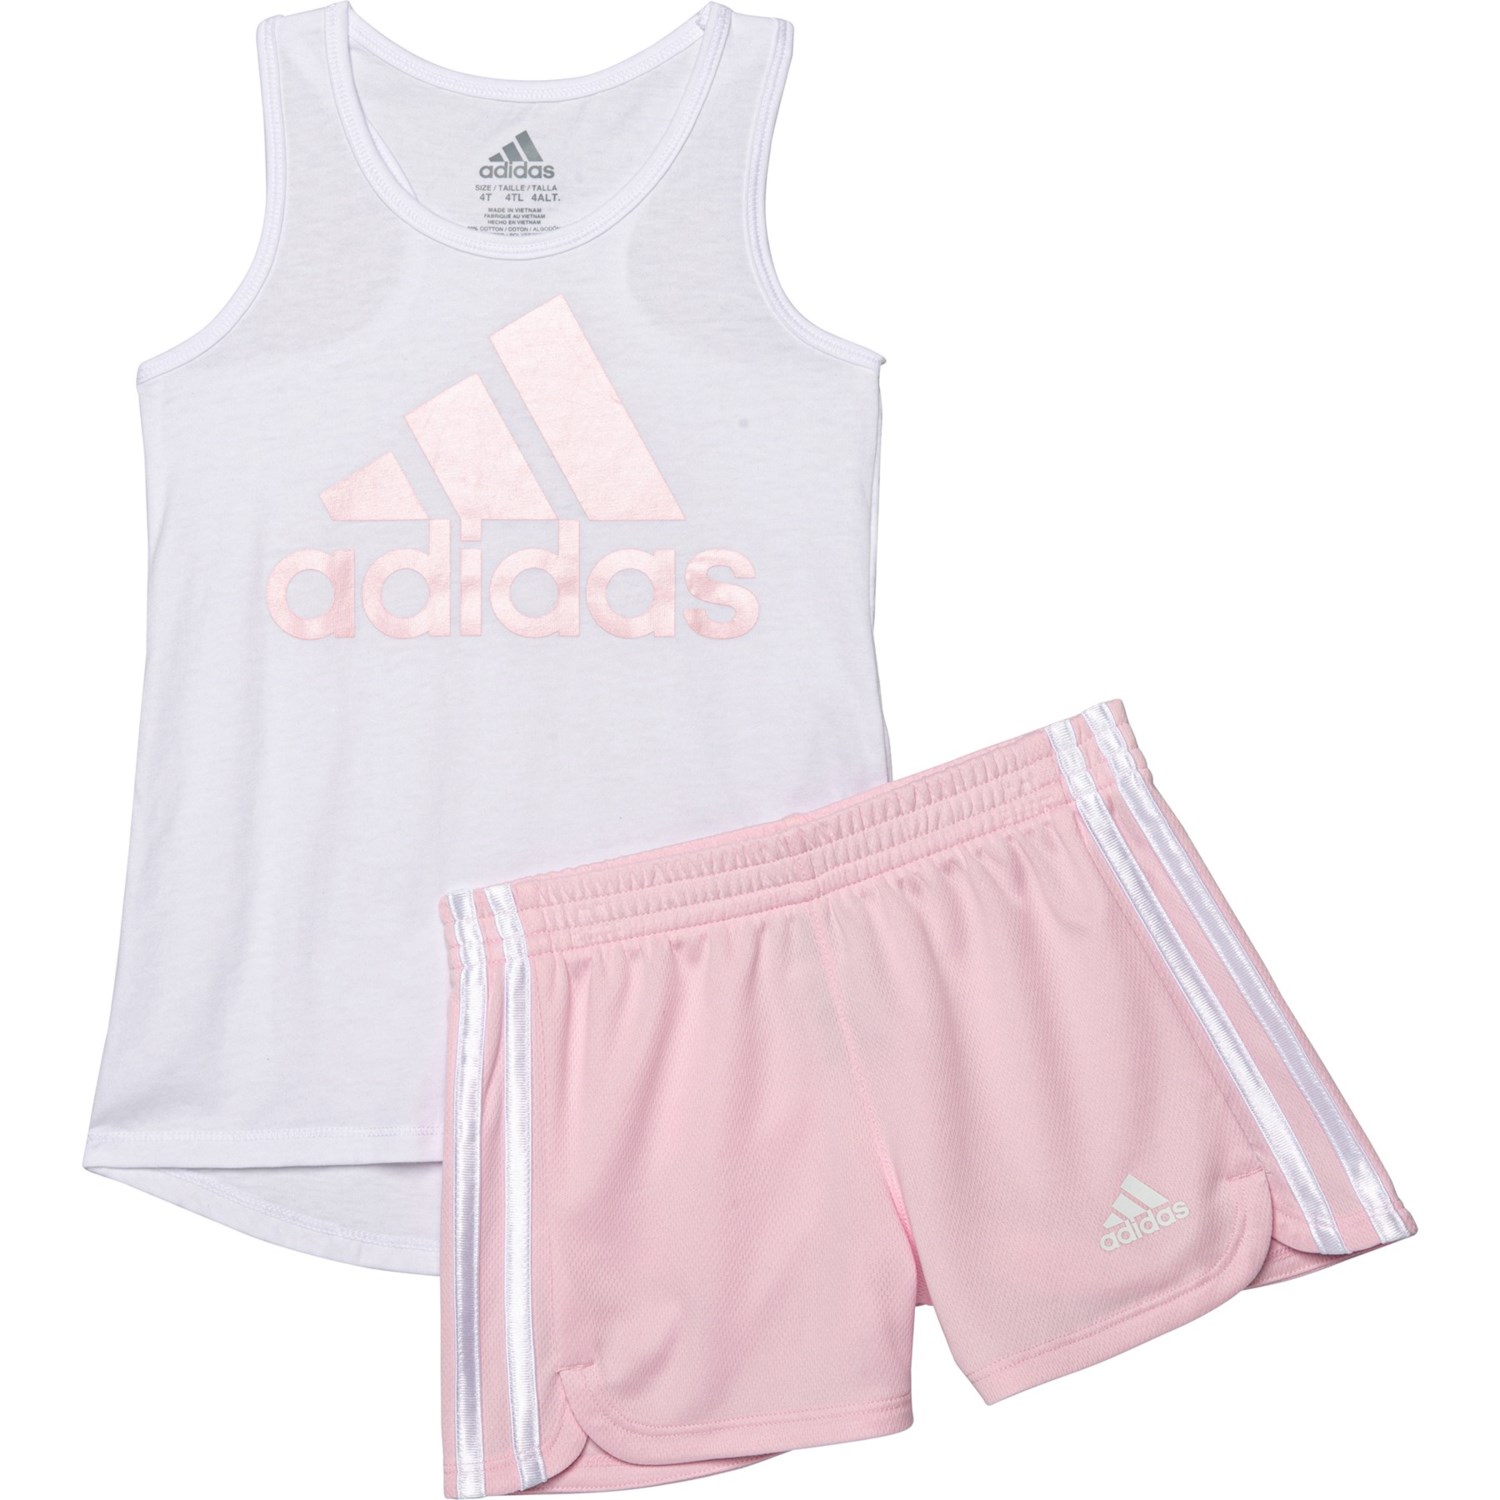 adidas Tank Top and Shorts Set (For Toddler Girls) - Save 95%